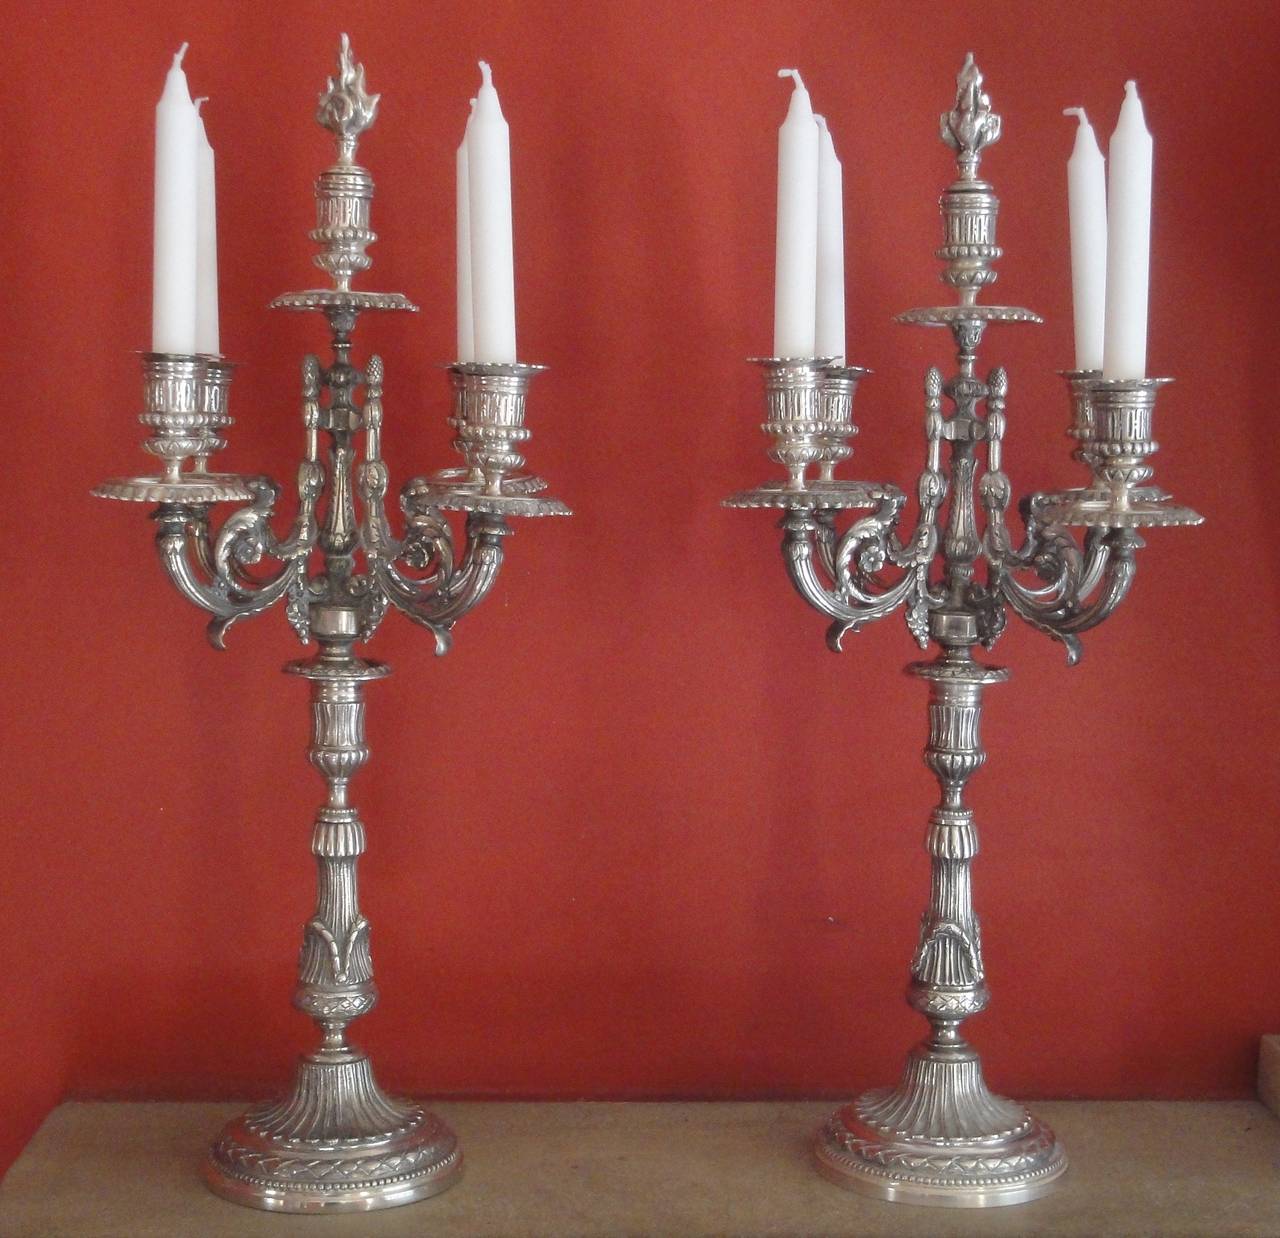 Superb pair of large heavy 4 branch or 5 candle candelabra .
Silver plated, with snuffers.
Impressive size 
Possibility of 4 or 5 candles, if using 4 leave the snuffers central top.
4 removable sconces on each.
Plating in good condition.
No